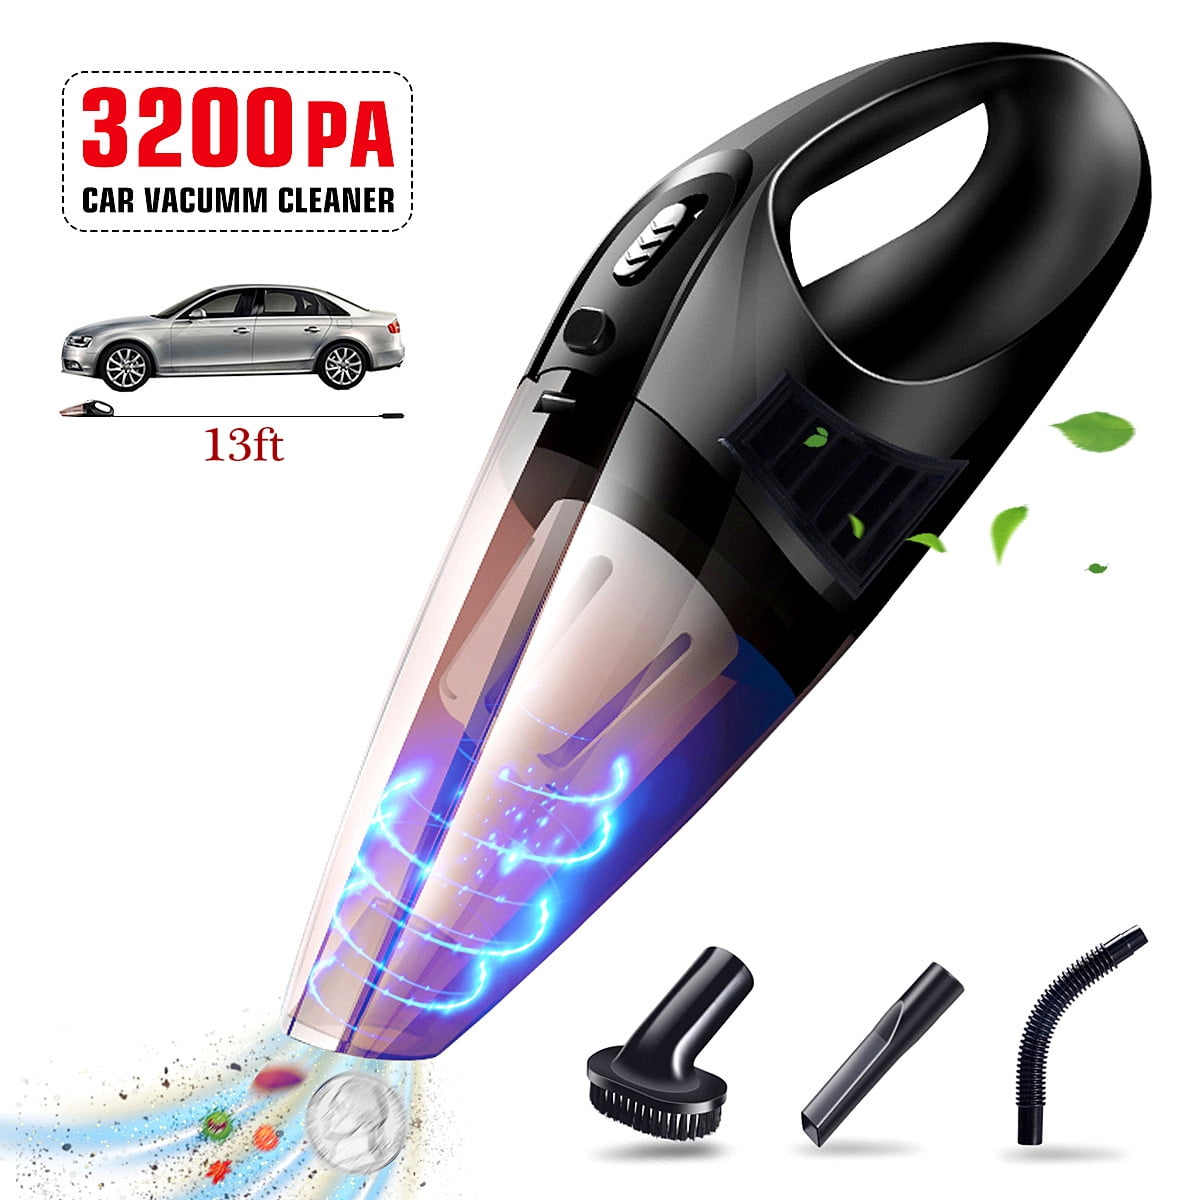 Cordless Car Vacuum Cleaner Handheld Home Rechargeable Wet Dry Duster Portable 